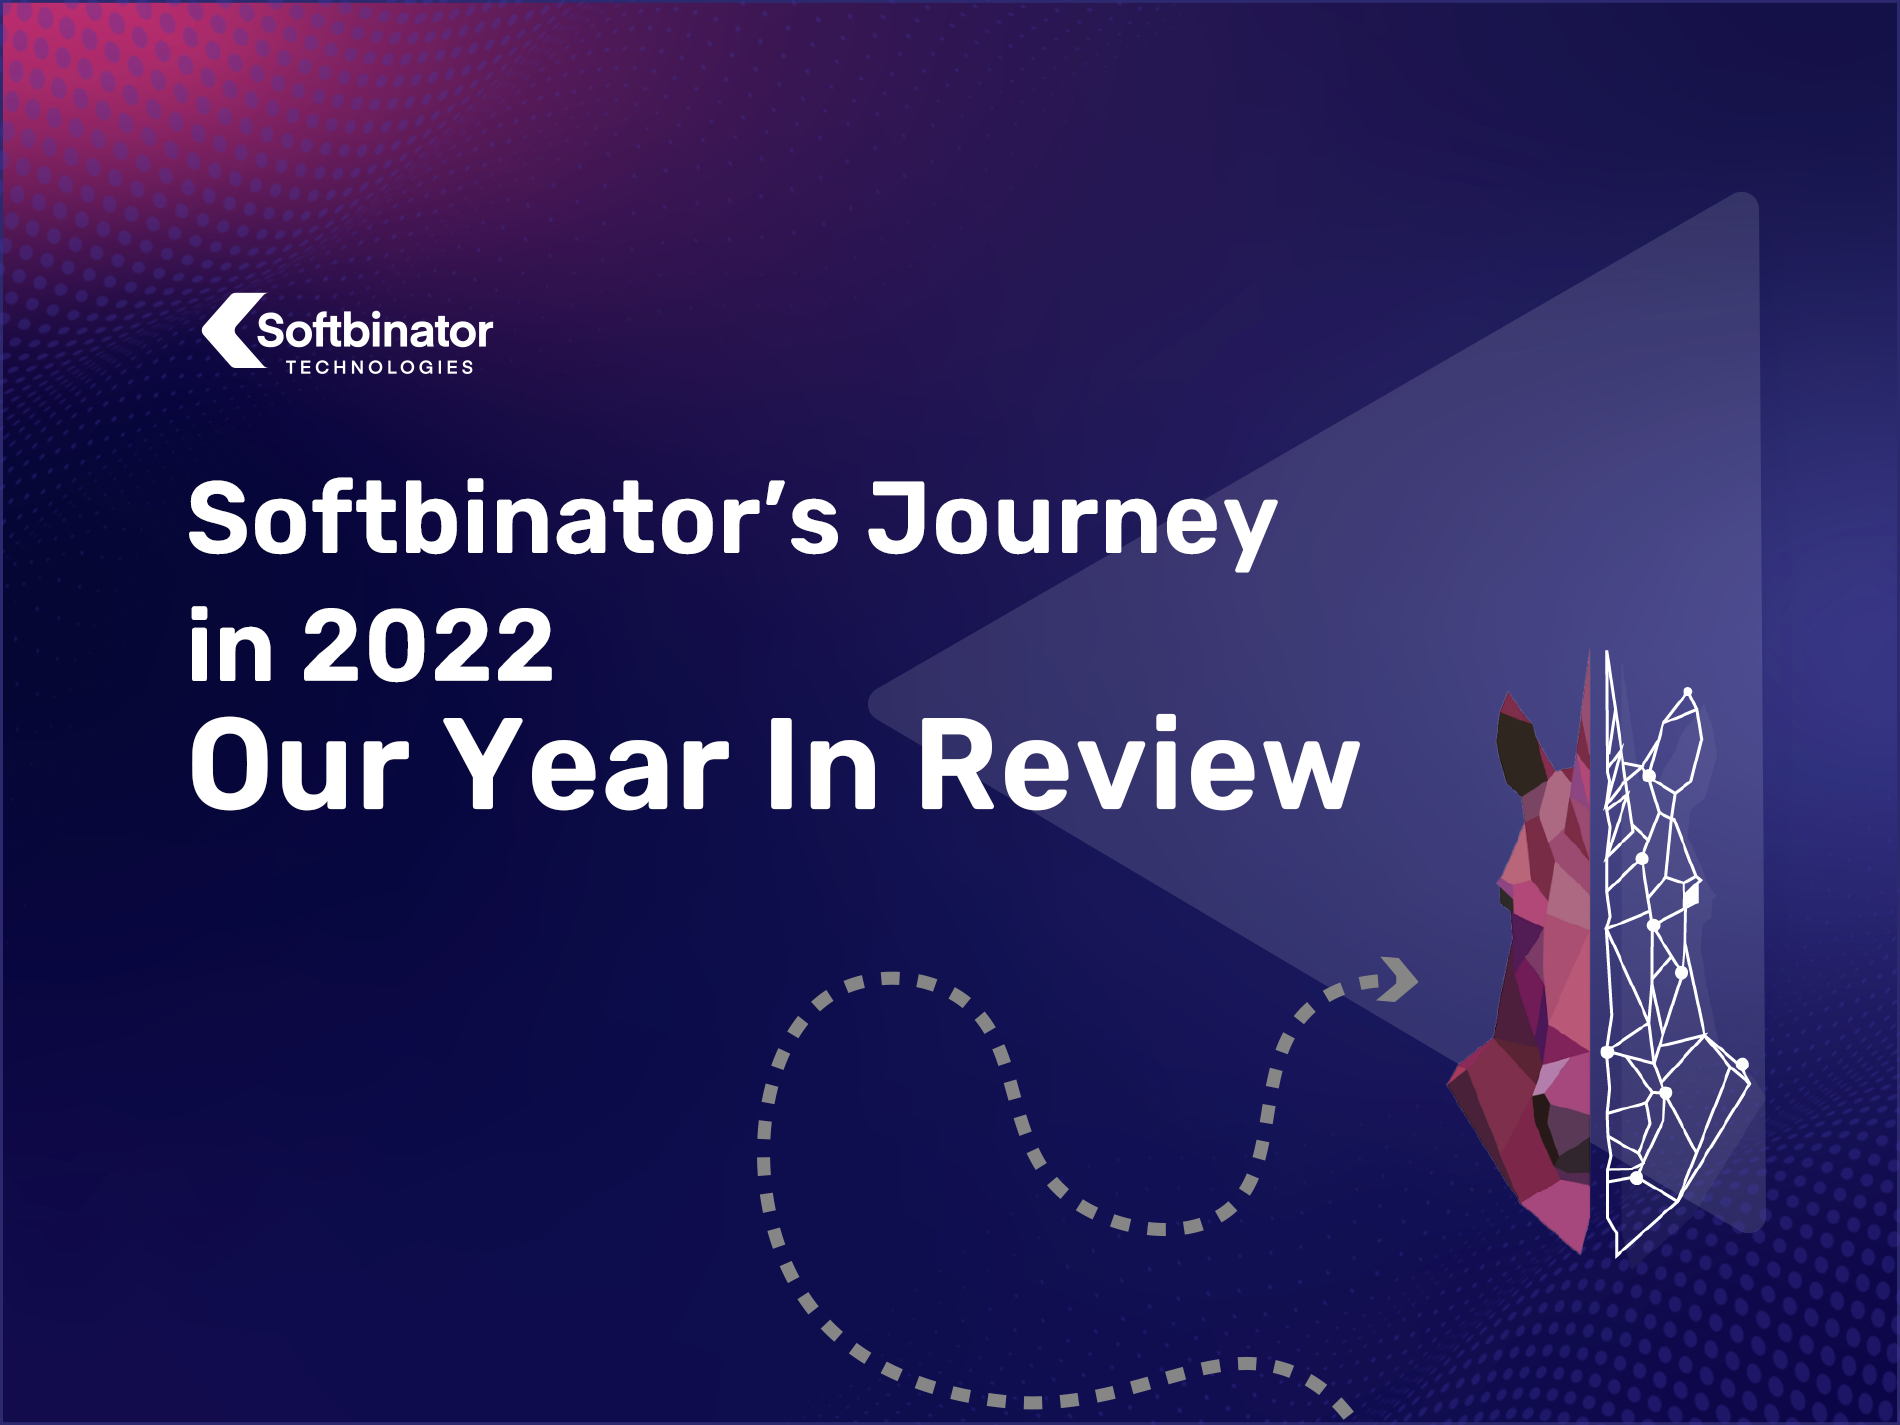 Softbinator’s Journey in 2022 - Our Year in Review